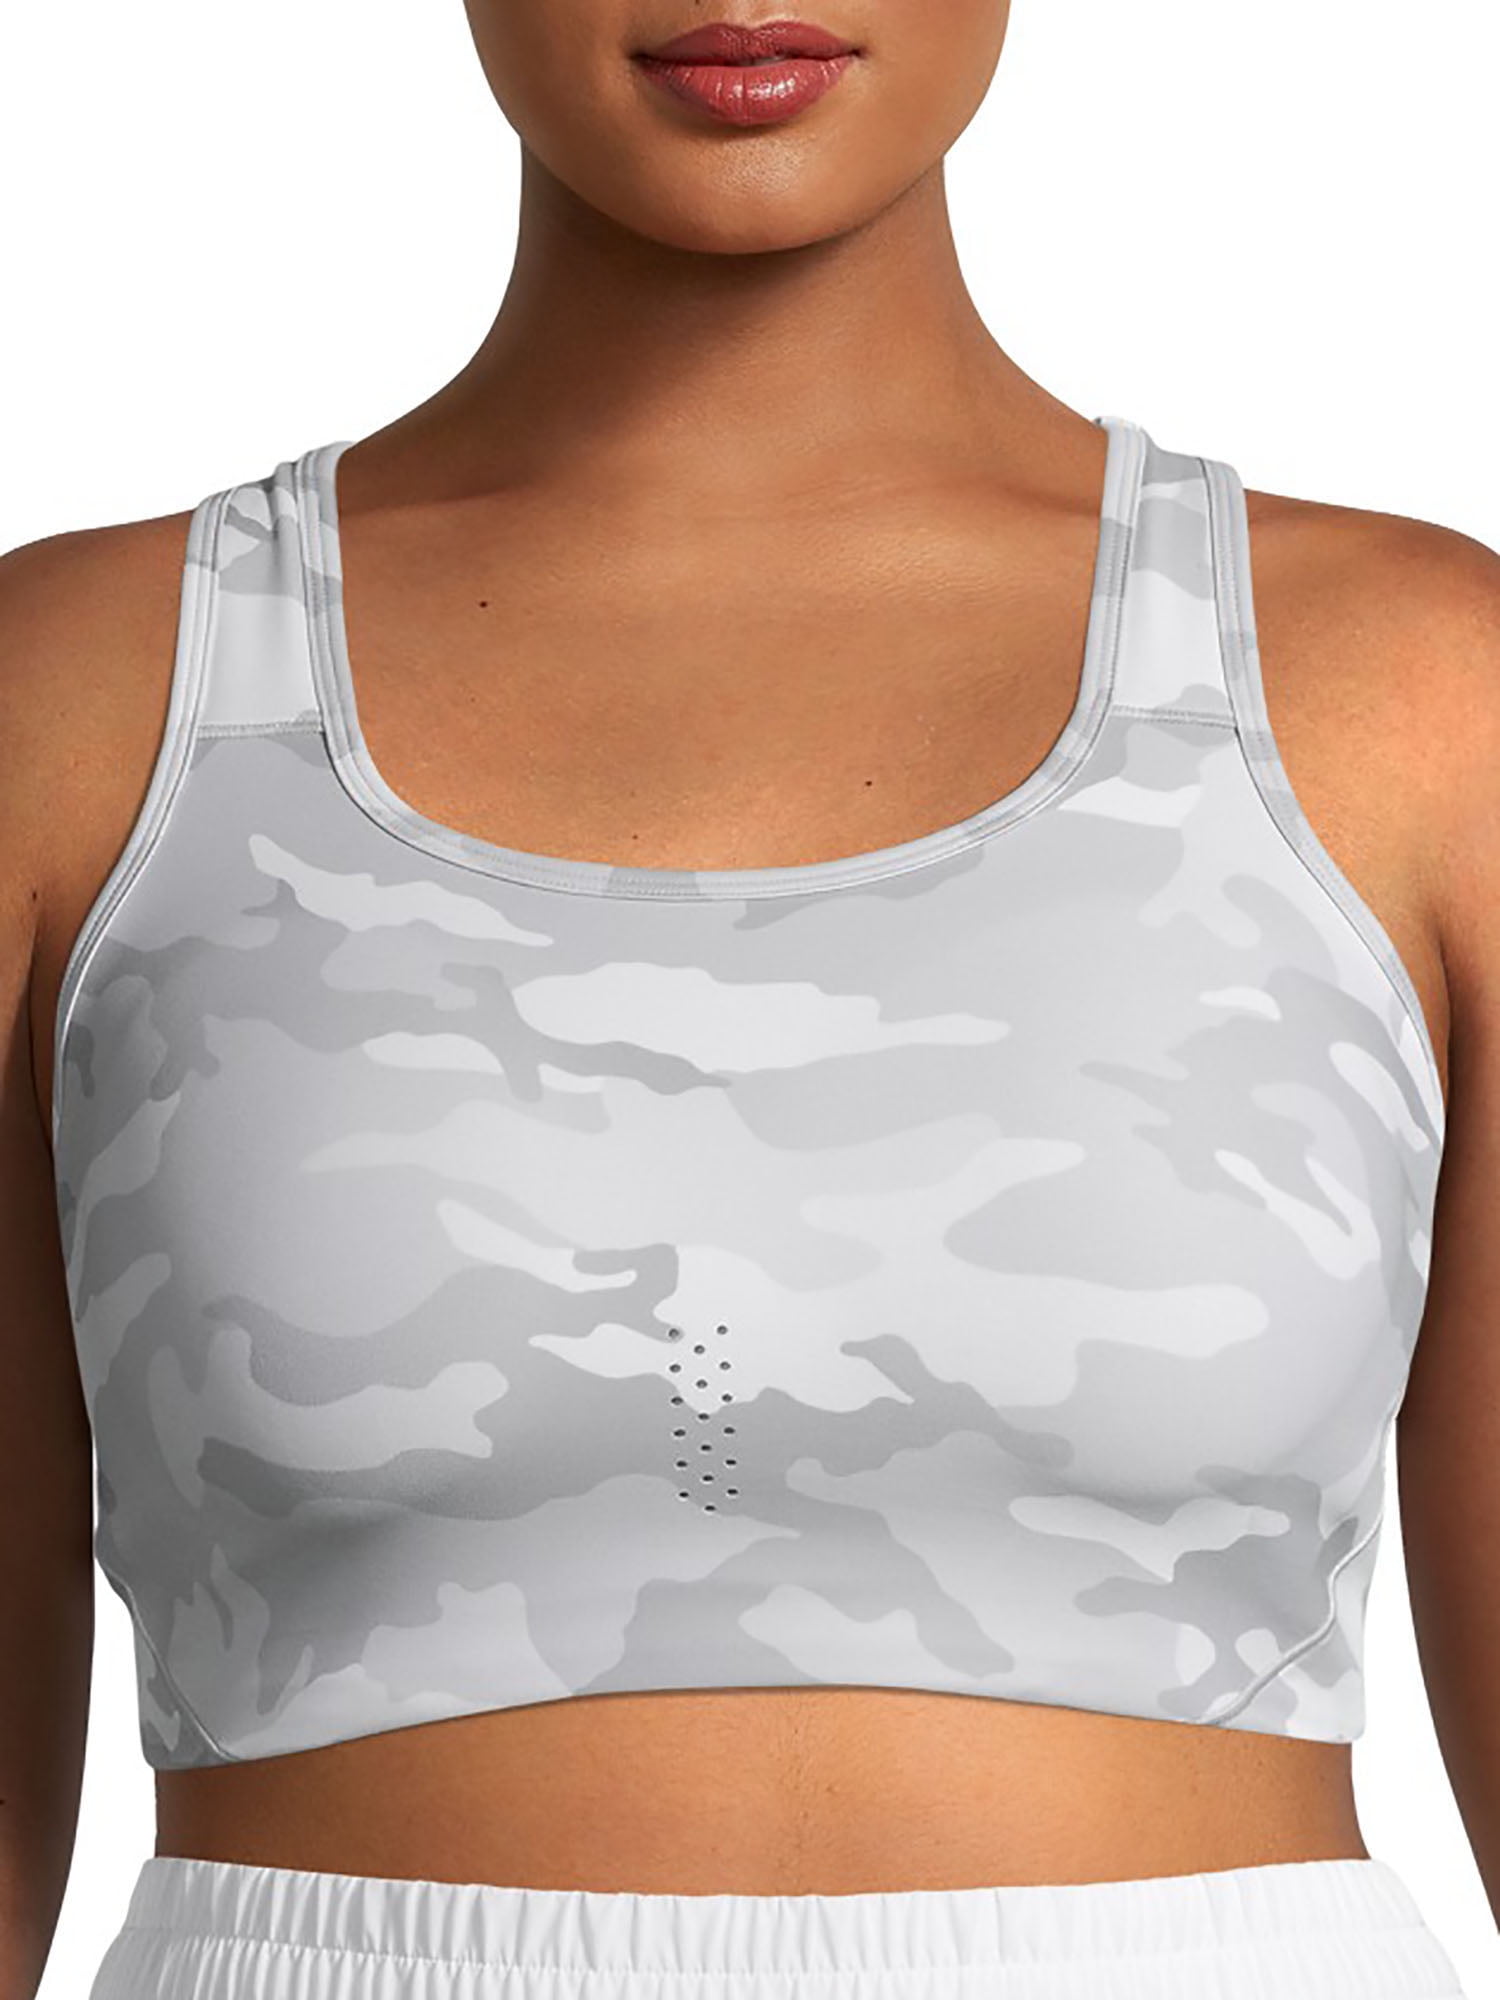 Buy Avia Womens Molded Cup Sports Bra Online India